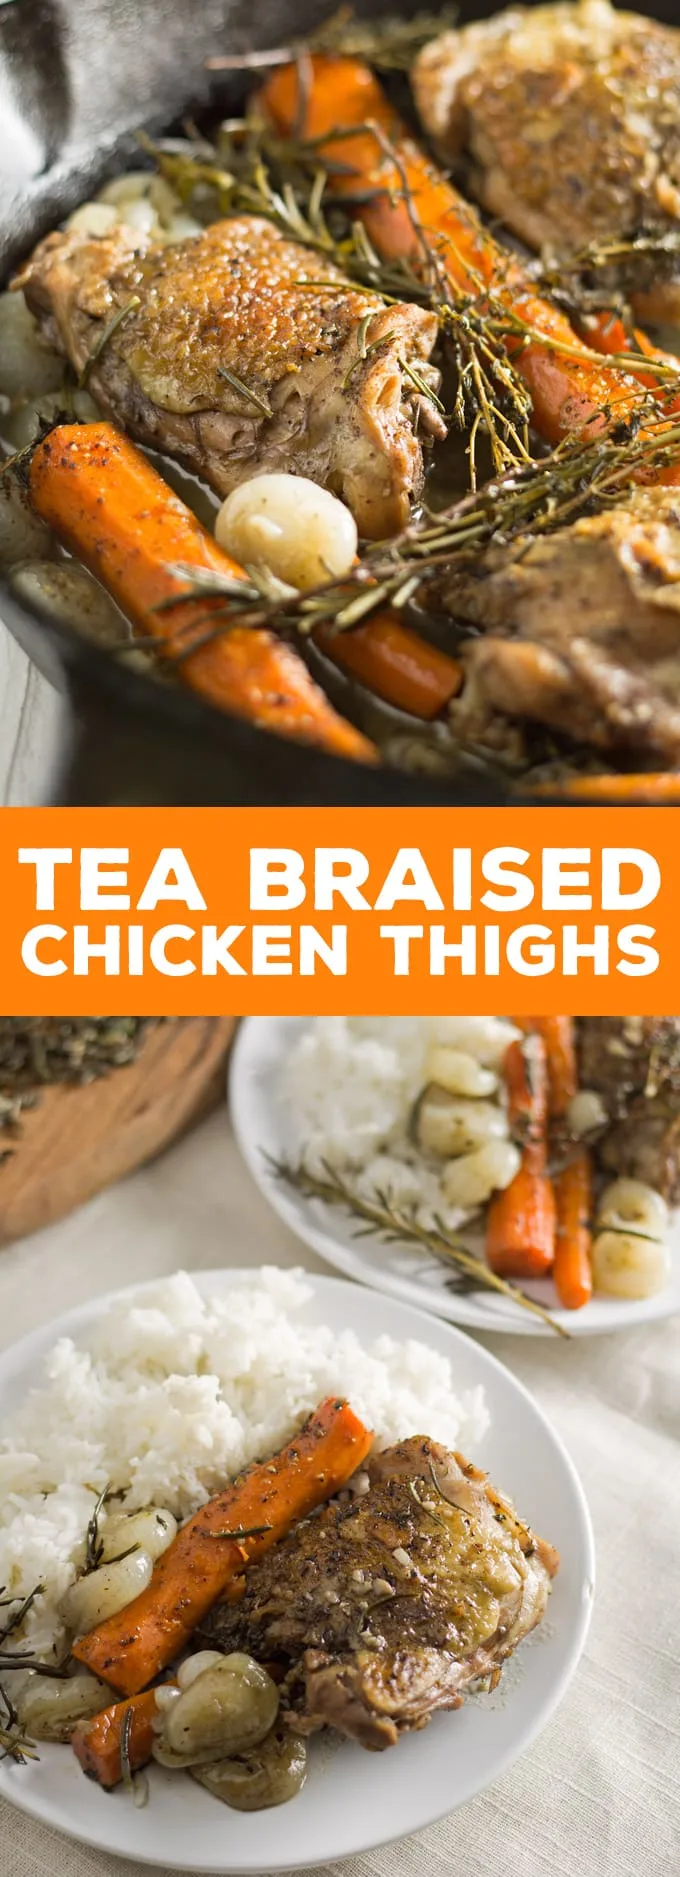 Grab a plate and a fork, cause you're going to want to dig in to this tea braised chicken thighs dinner! I see many delicious Sunday suppers in your future. | honeyandbirch.com